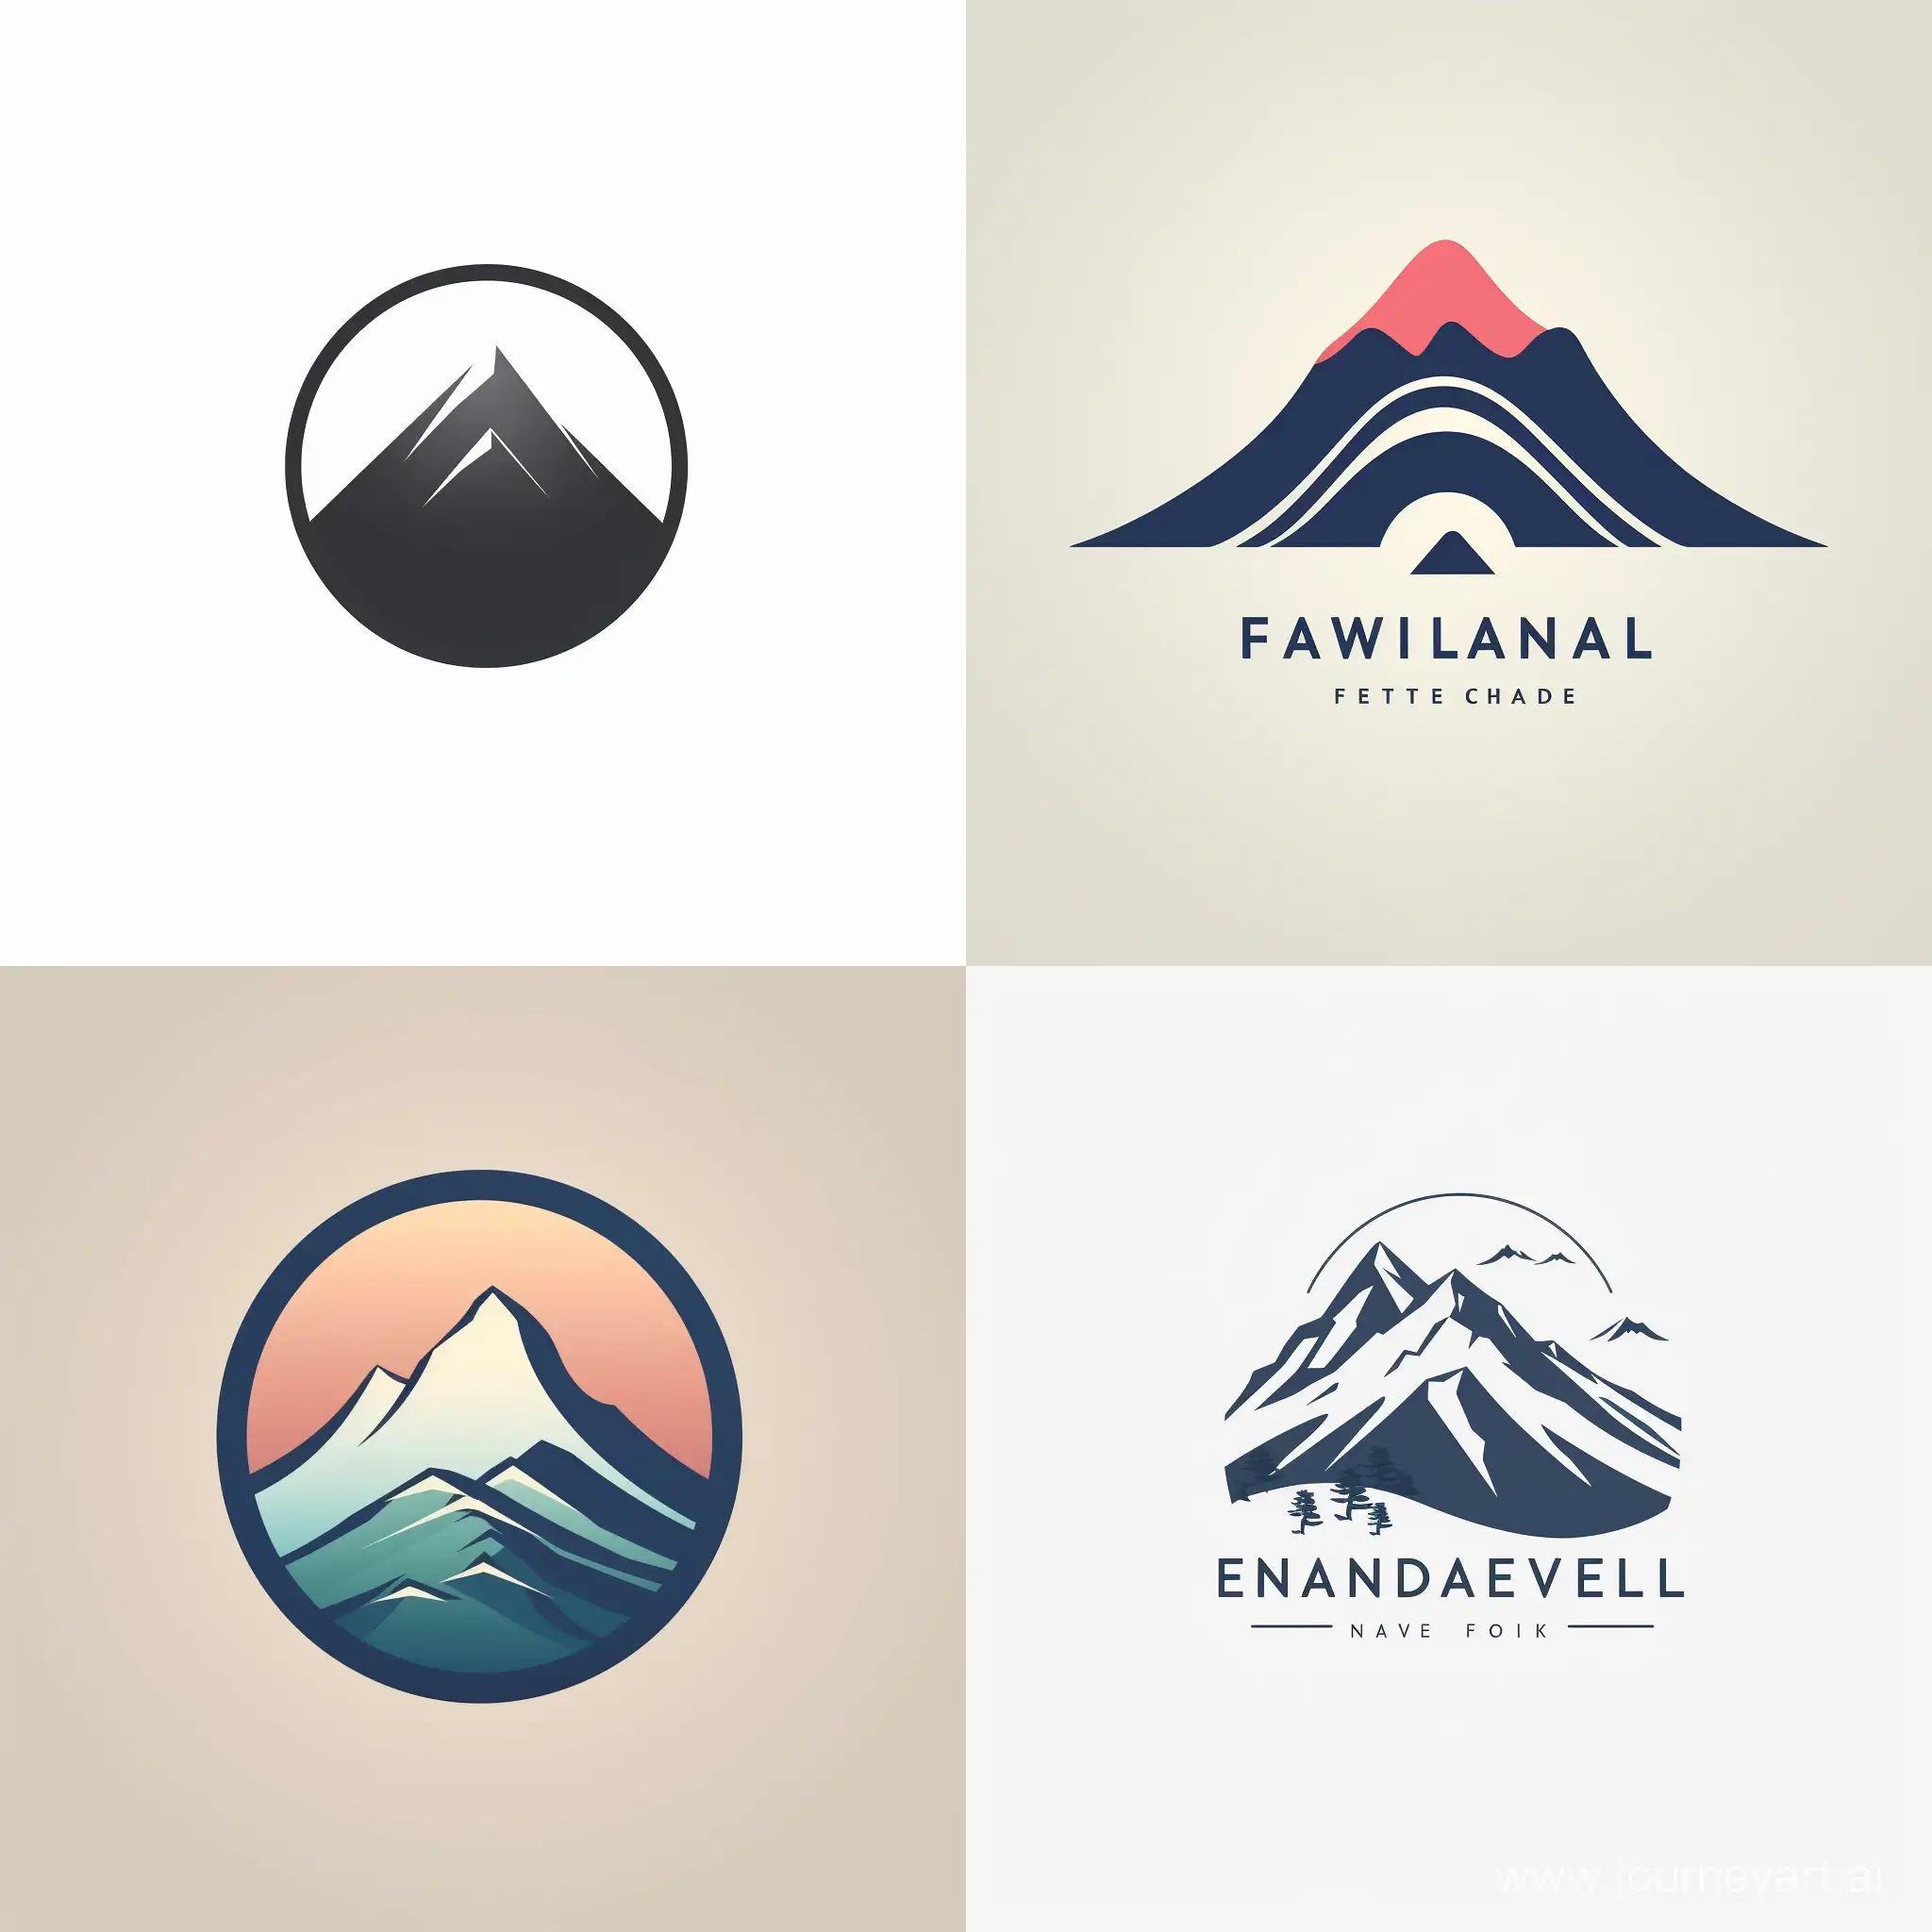 WE ARE A COUPLE FROM THE HILLS OF UTTARAKHAND TRYING TO ESTABLISH AN ARCHITECTURE, LANDSCAPE AND URBAN DESIGN FIRM BY THE NAME OF ENVIRONMENT AND PEOPLE DESIGN STUDIO. GENERATE SOME IDEAS ON ITS LOGO DESIGN KEEPING IN MIND ABSTRACT AND MINIMAL INSPIRATION FROM OUR DETAILS